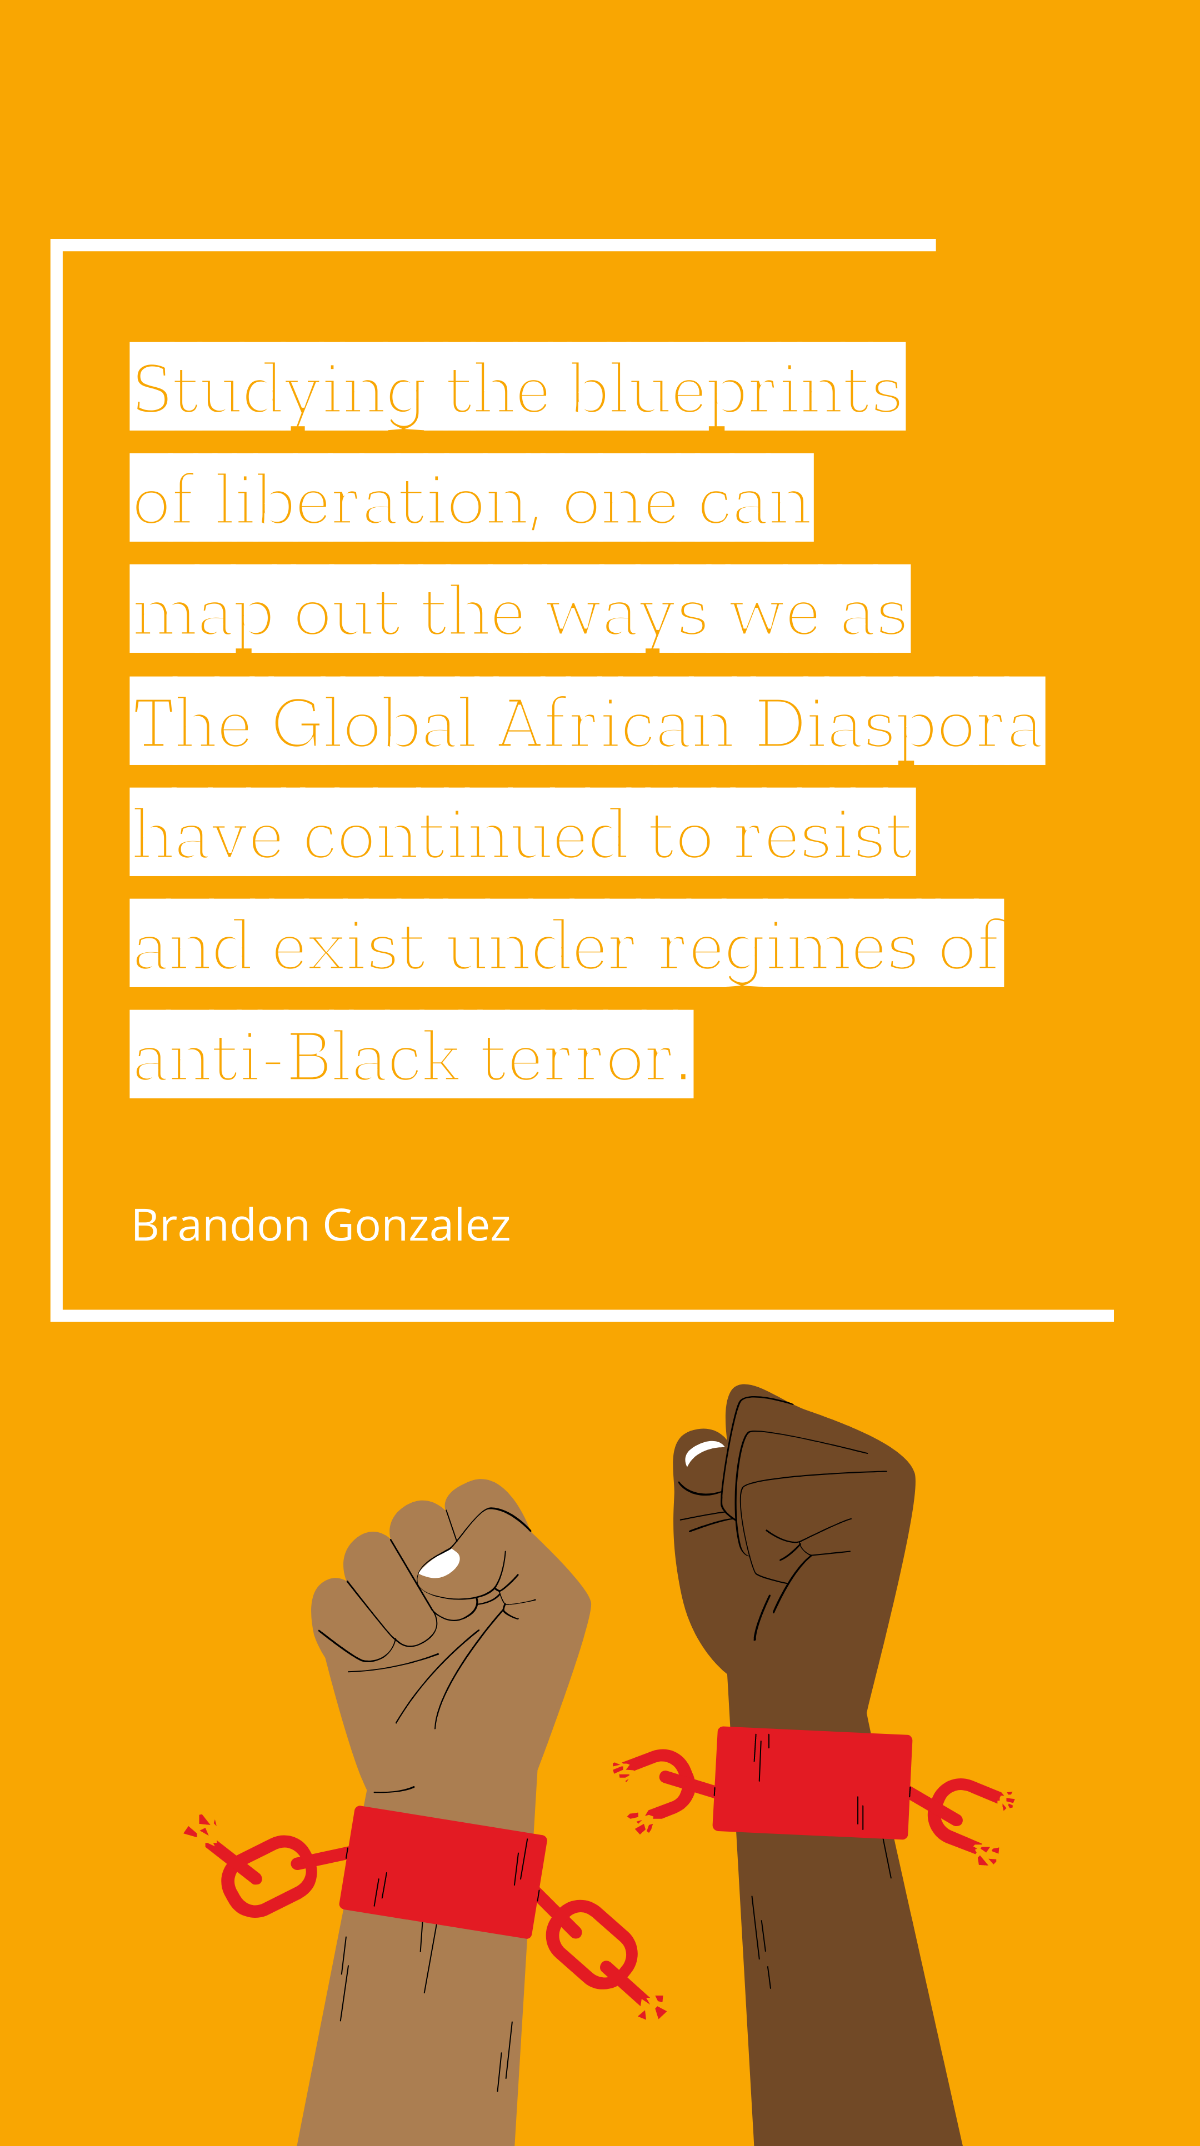 Brandon Gonzalez - Studying the blueprints of liberation, one can map out the ways we as The Global African Diaspora have continued to resist and exist under regimes of anti-Black terror. Template